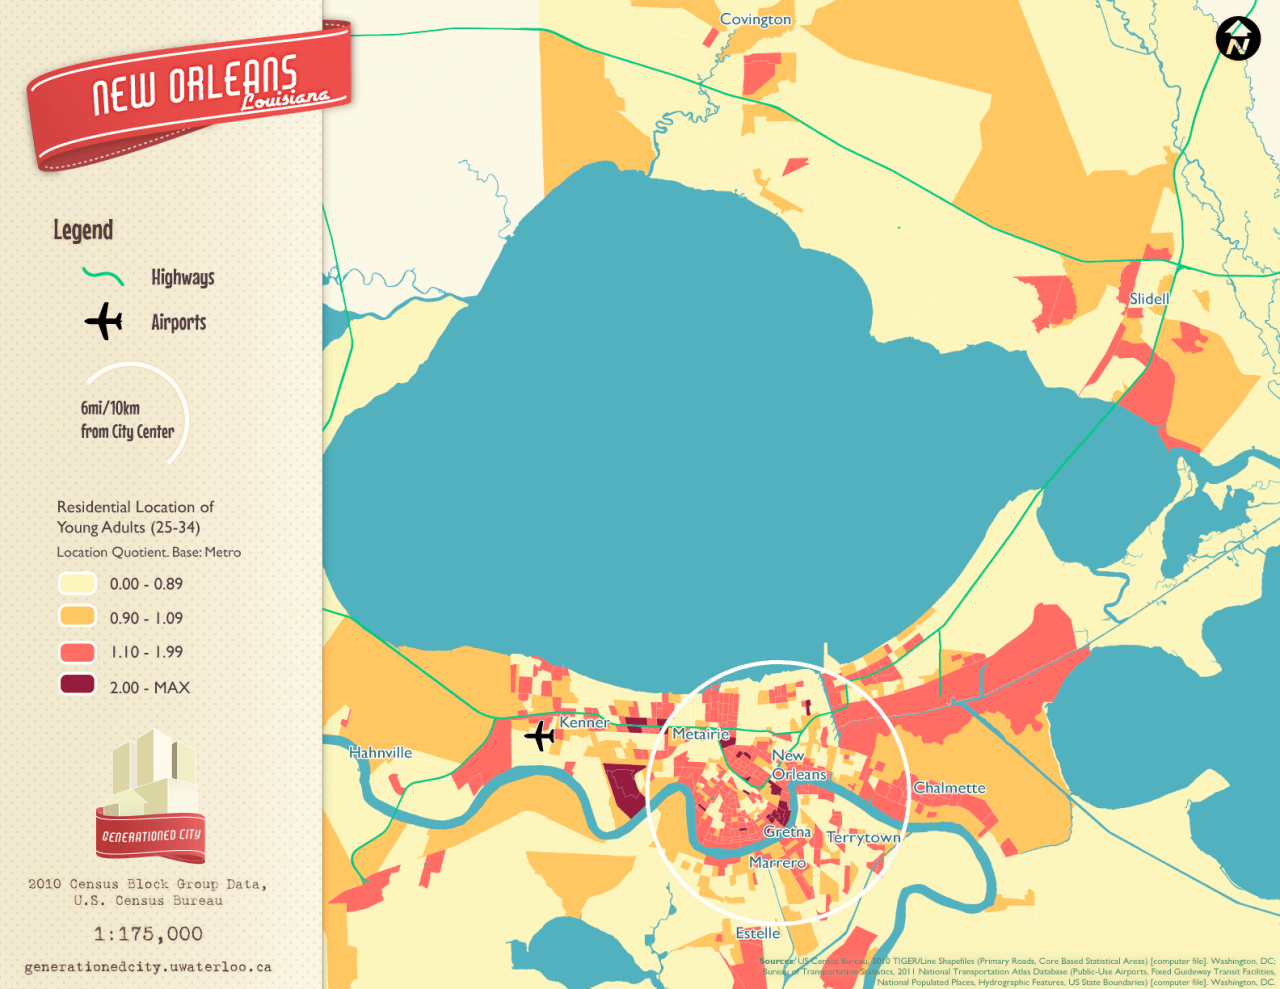 Residential location of young adults in New Orleans.